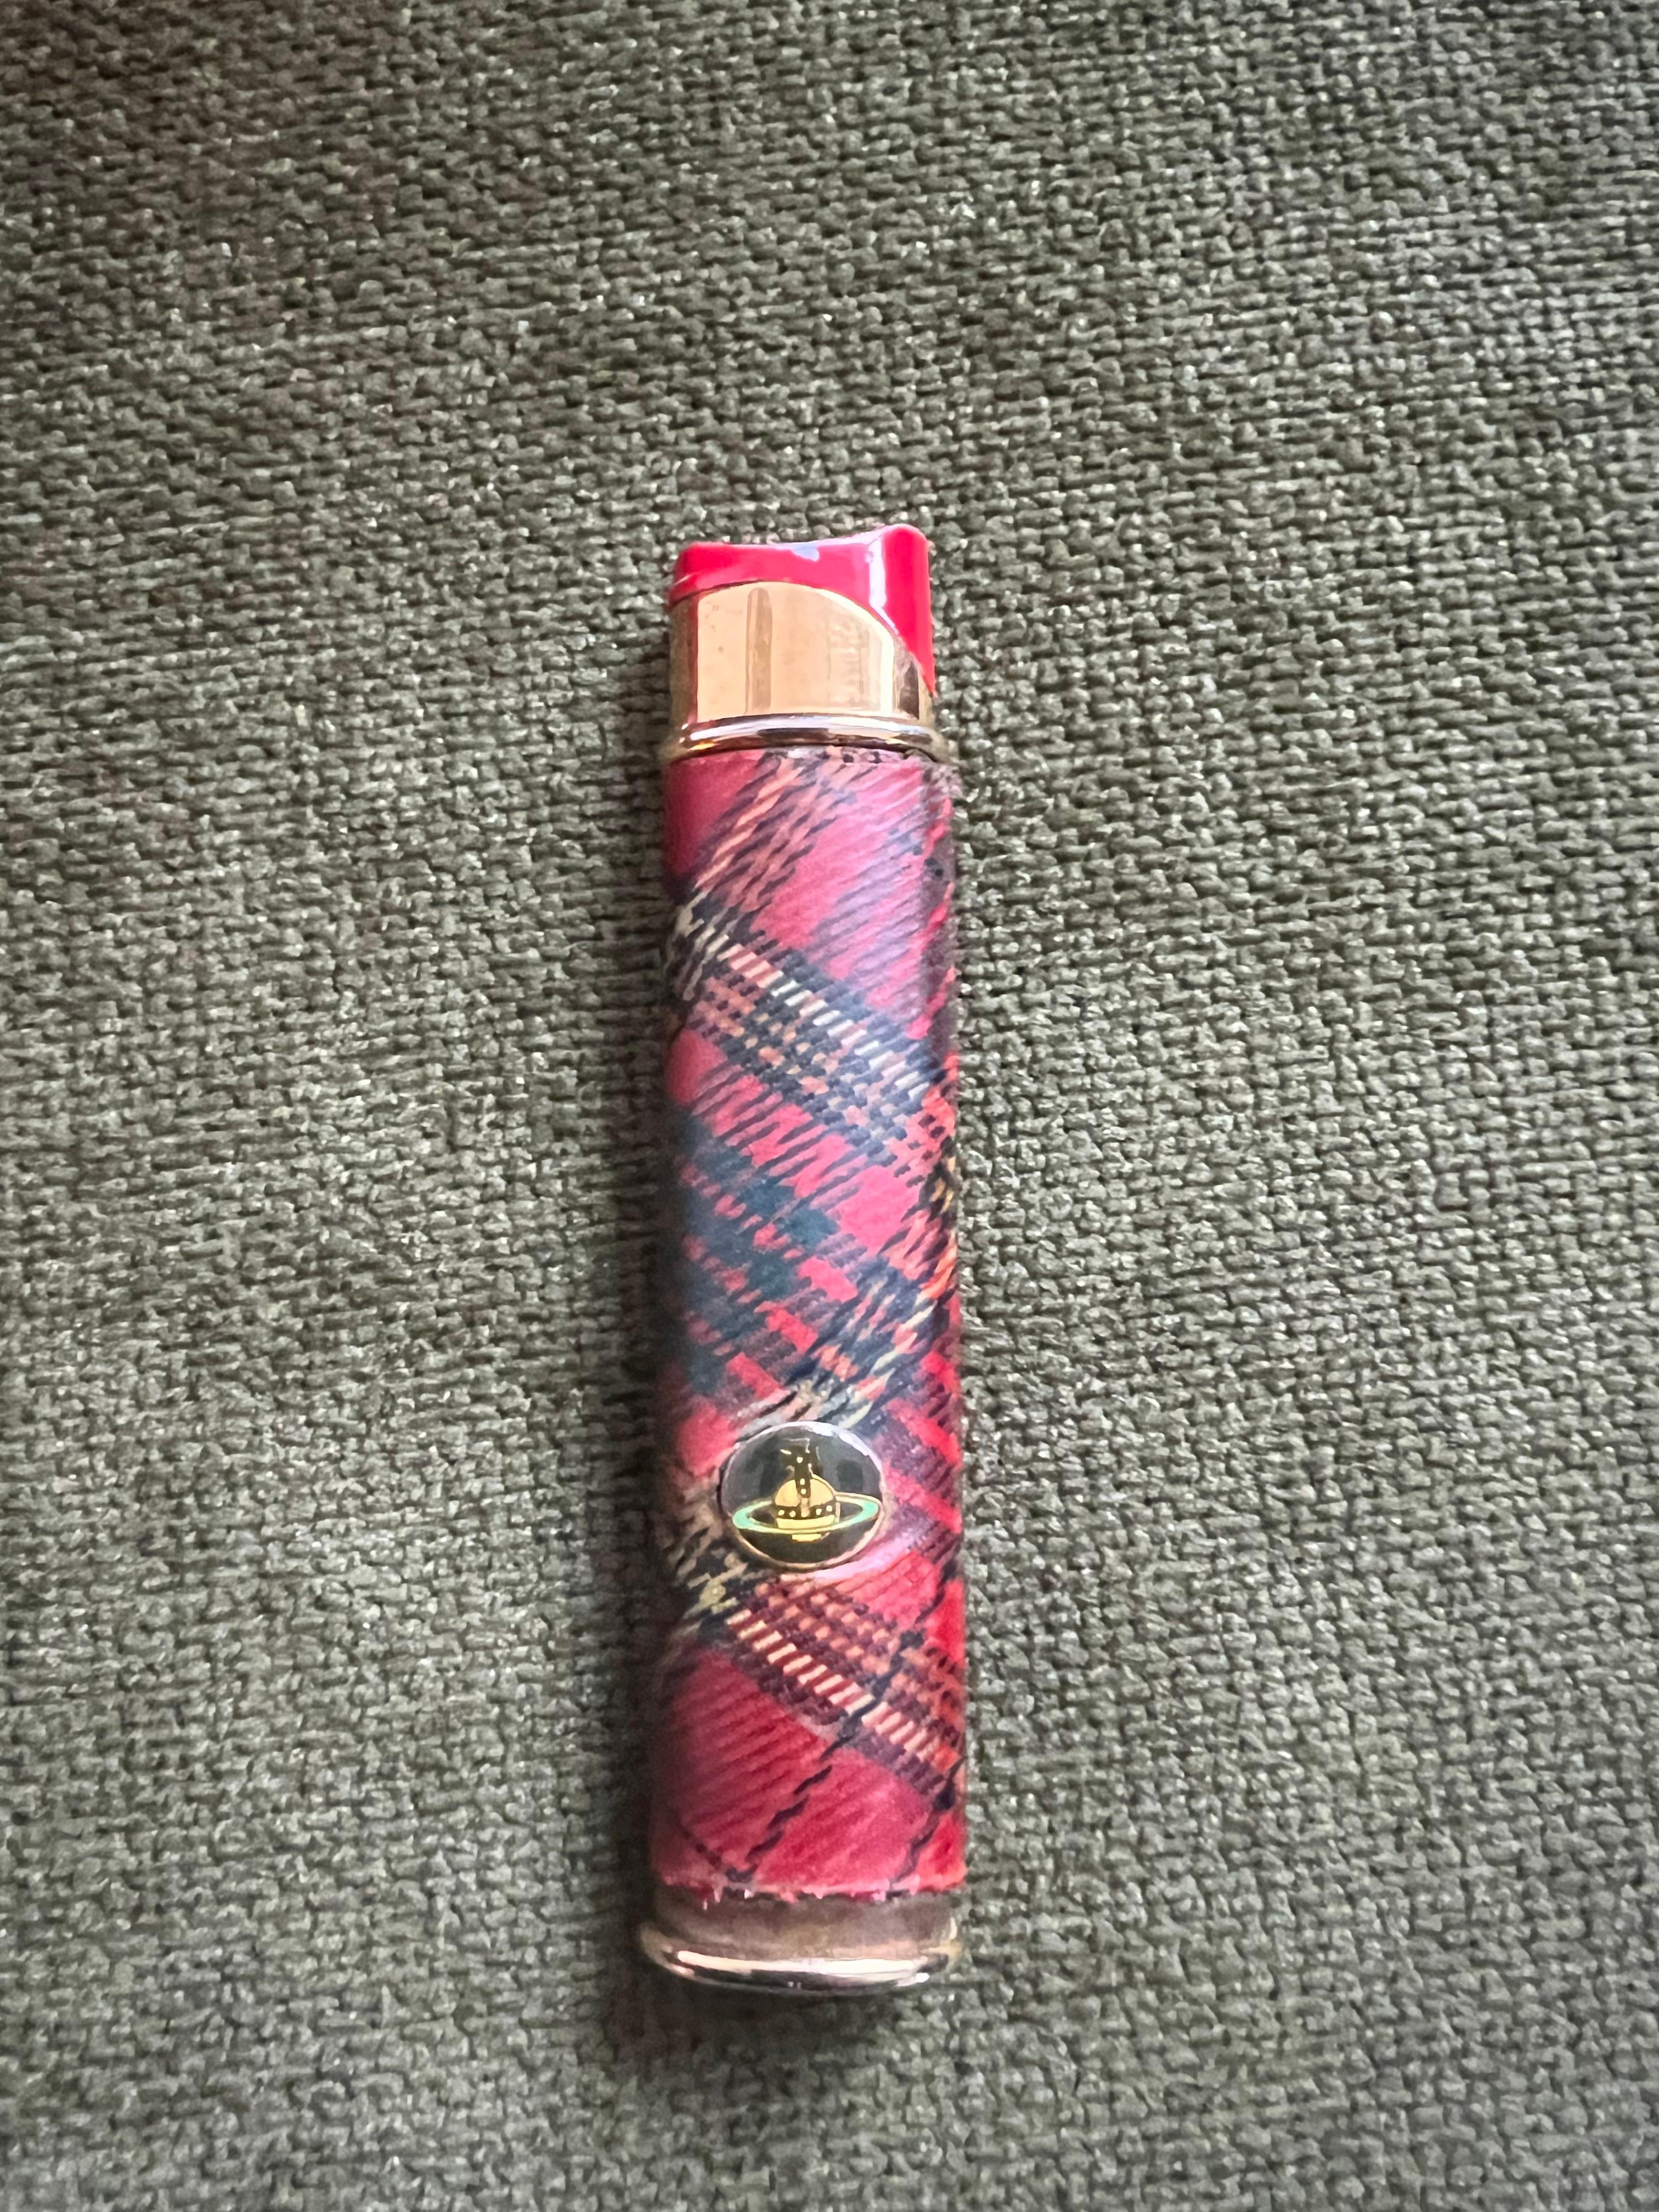 “Vivienne Westwood” Vintage Circa 80s British Mac check Orb Logo Enamel Lighter In Excellent Condition For Sale In New York, NY